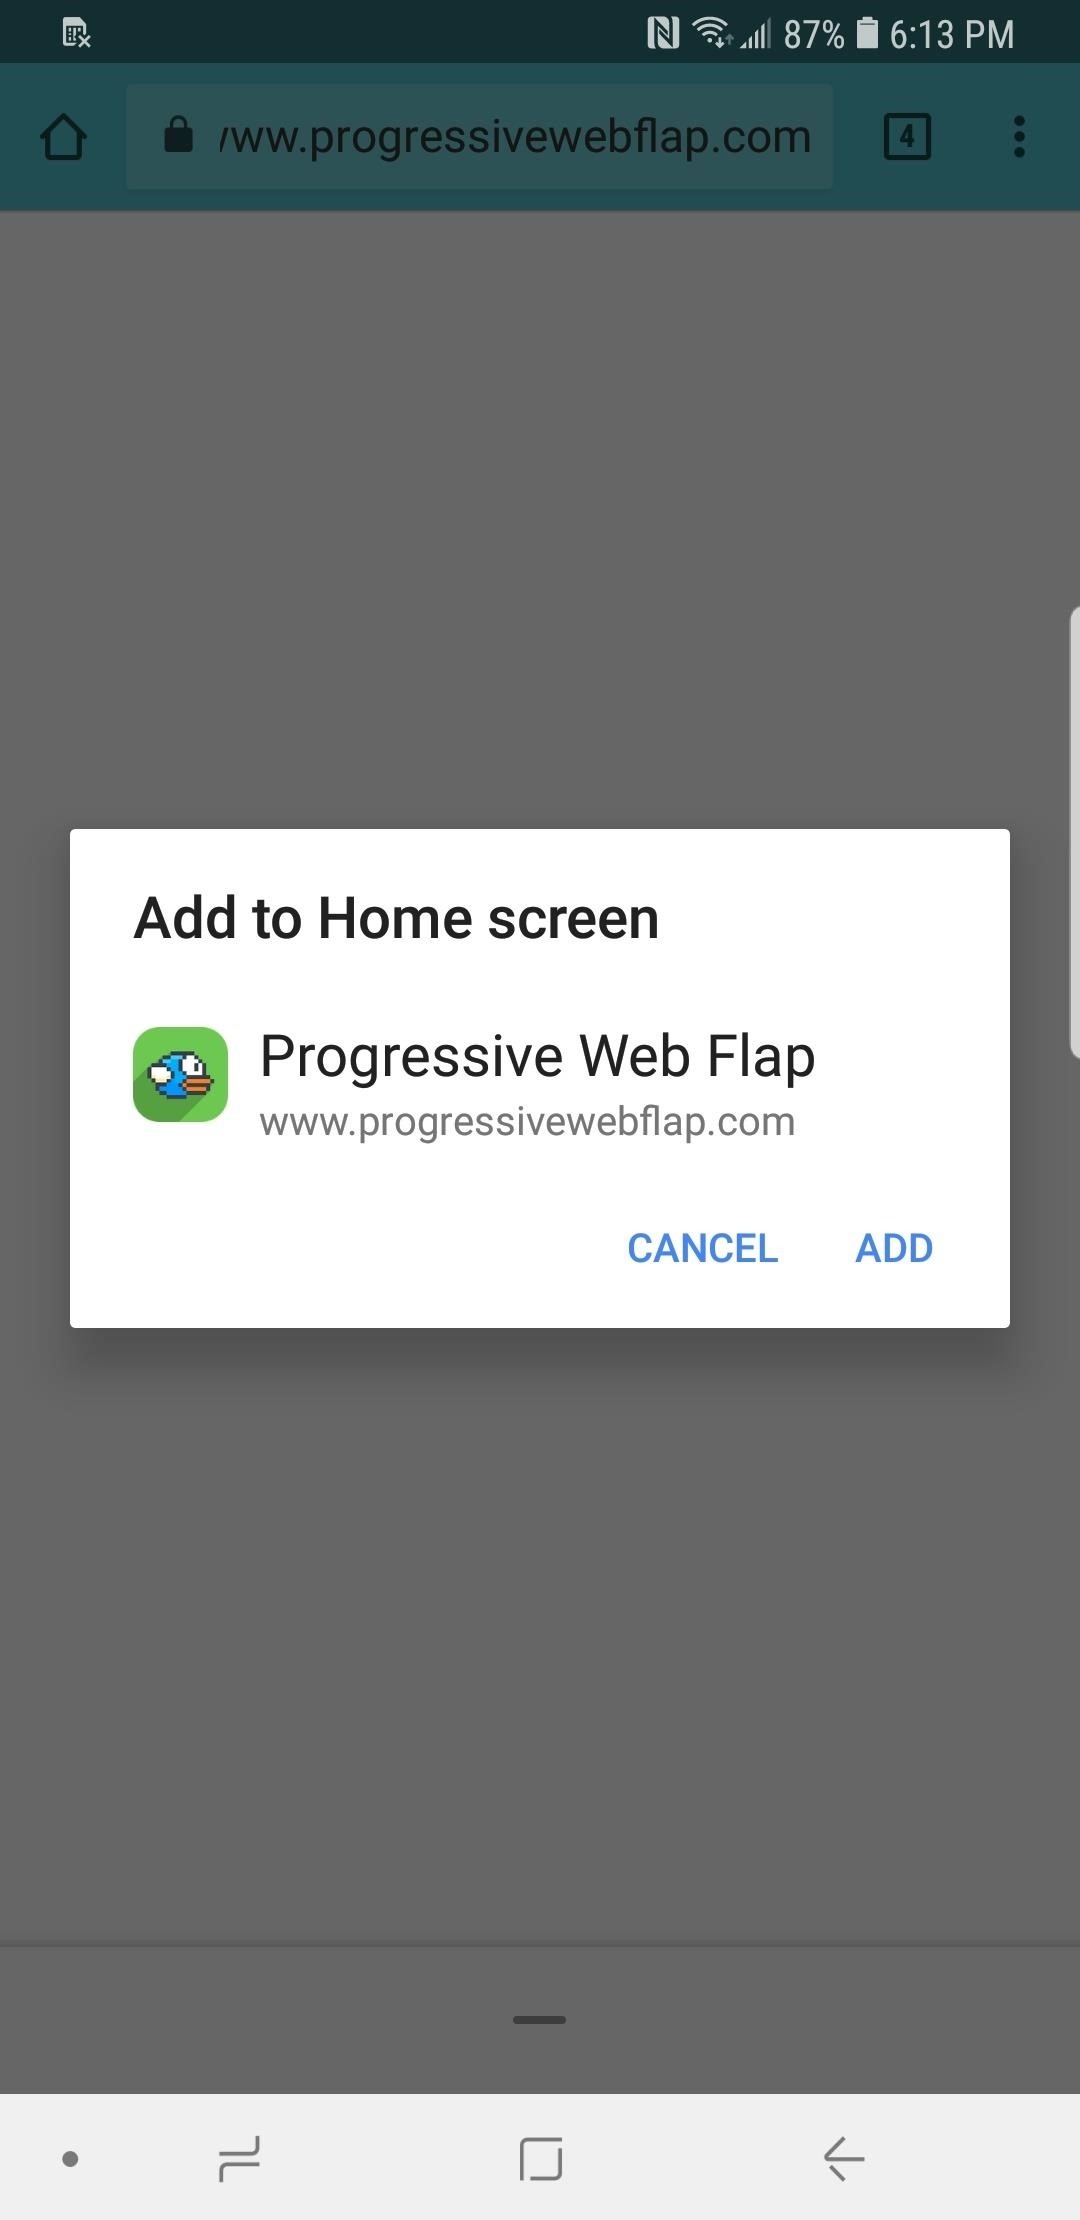 Google Chrome 101: How to Save Webpages & PWAs to Your Home Screen for Instant Access